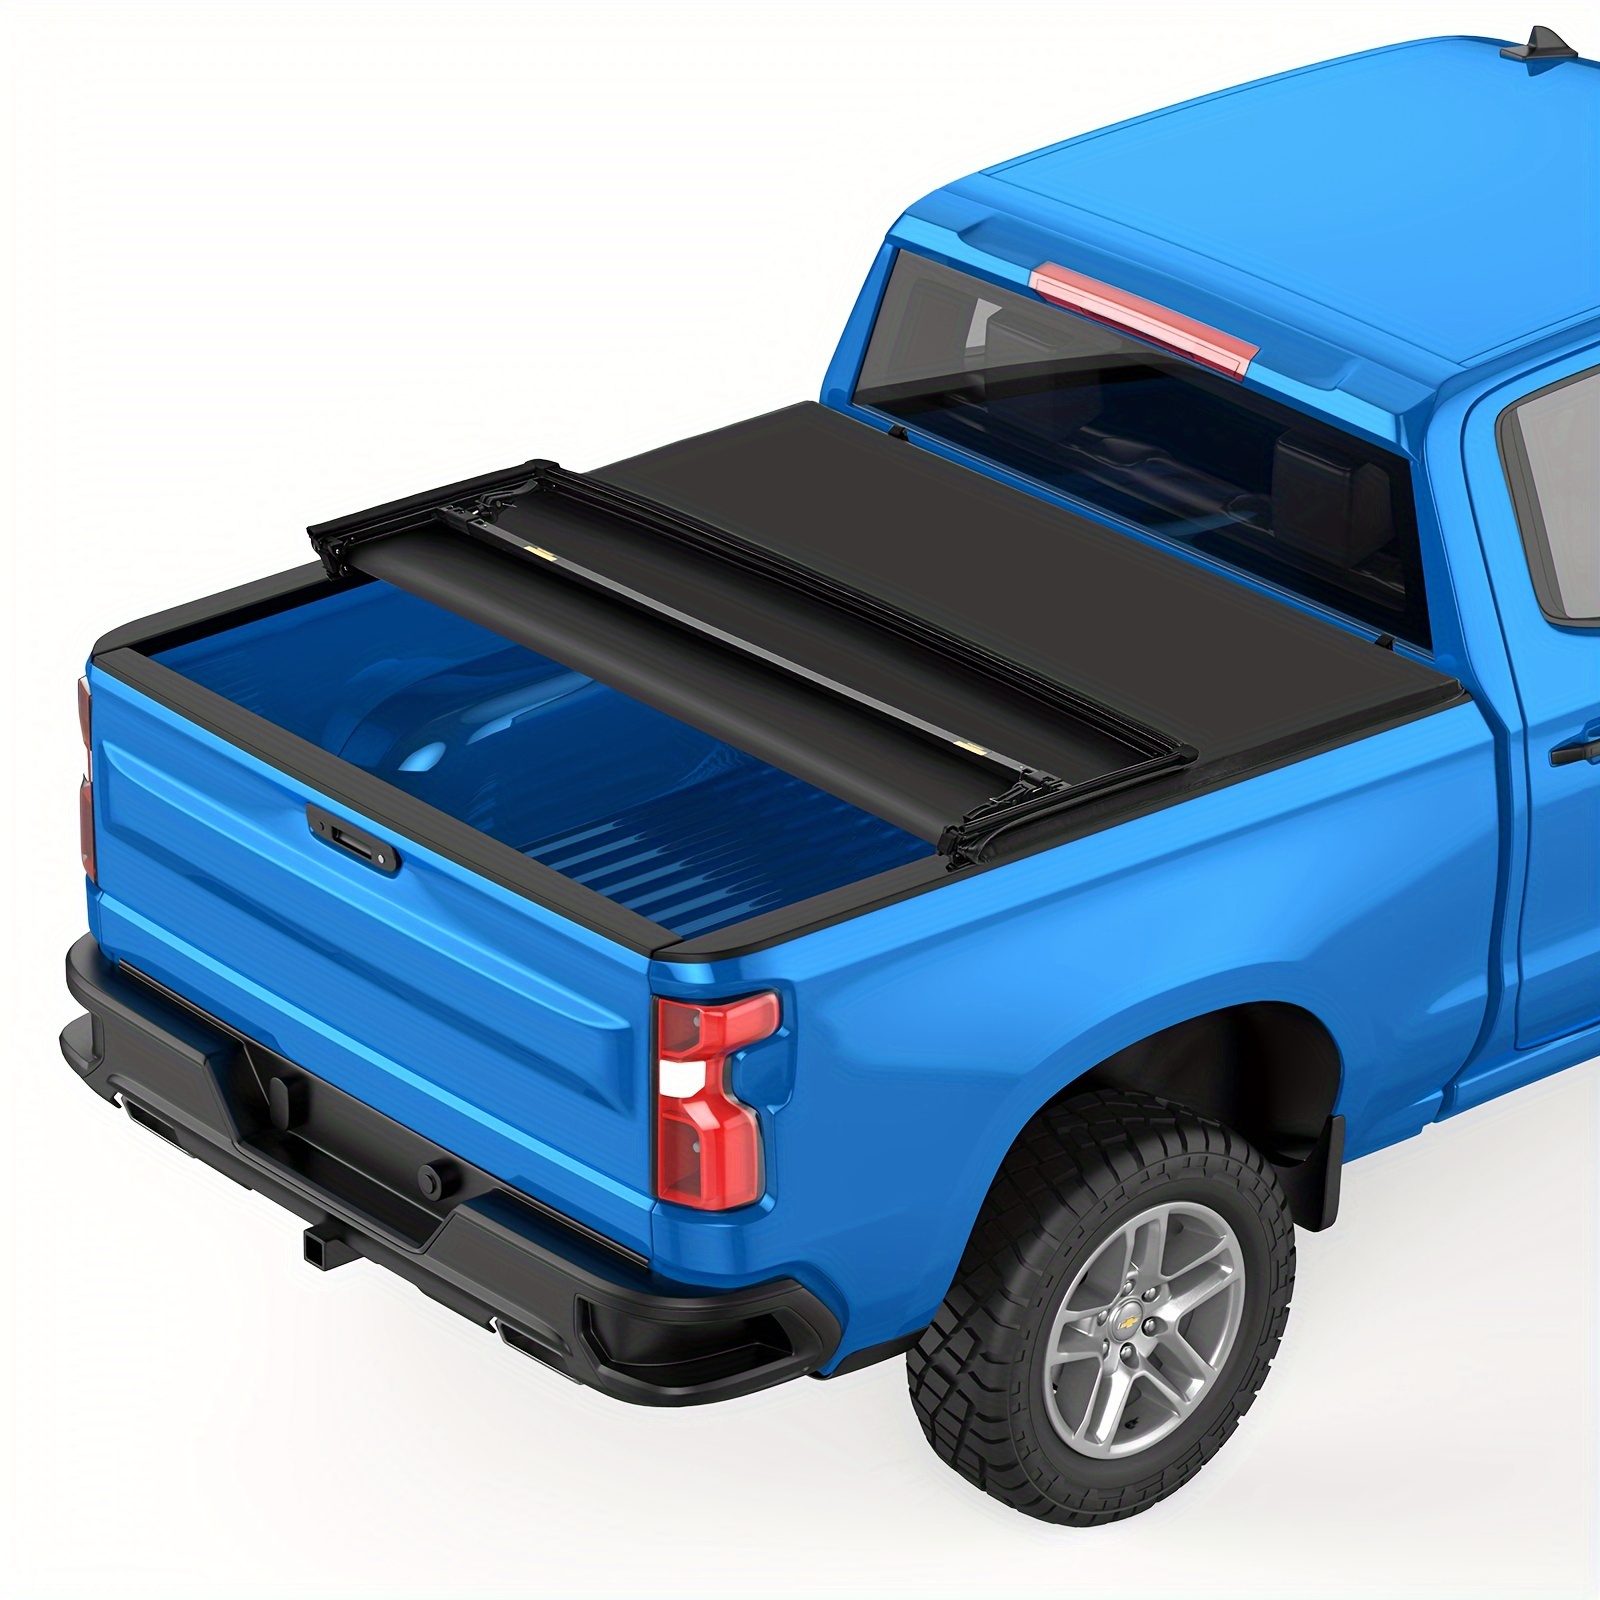 

Adoolla Truck Back Cover - - Tonneau Cover, Security, Easy Installation, Running Boards, Weather-resistant 2009-2023 For Dodge For Ram 1500